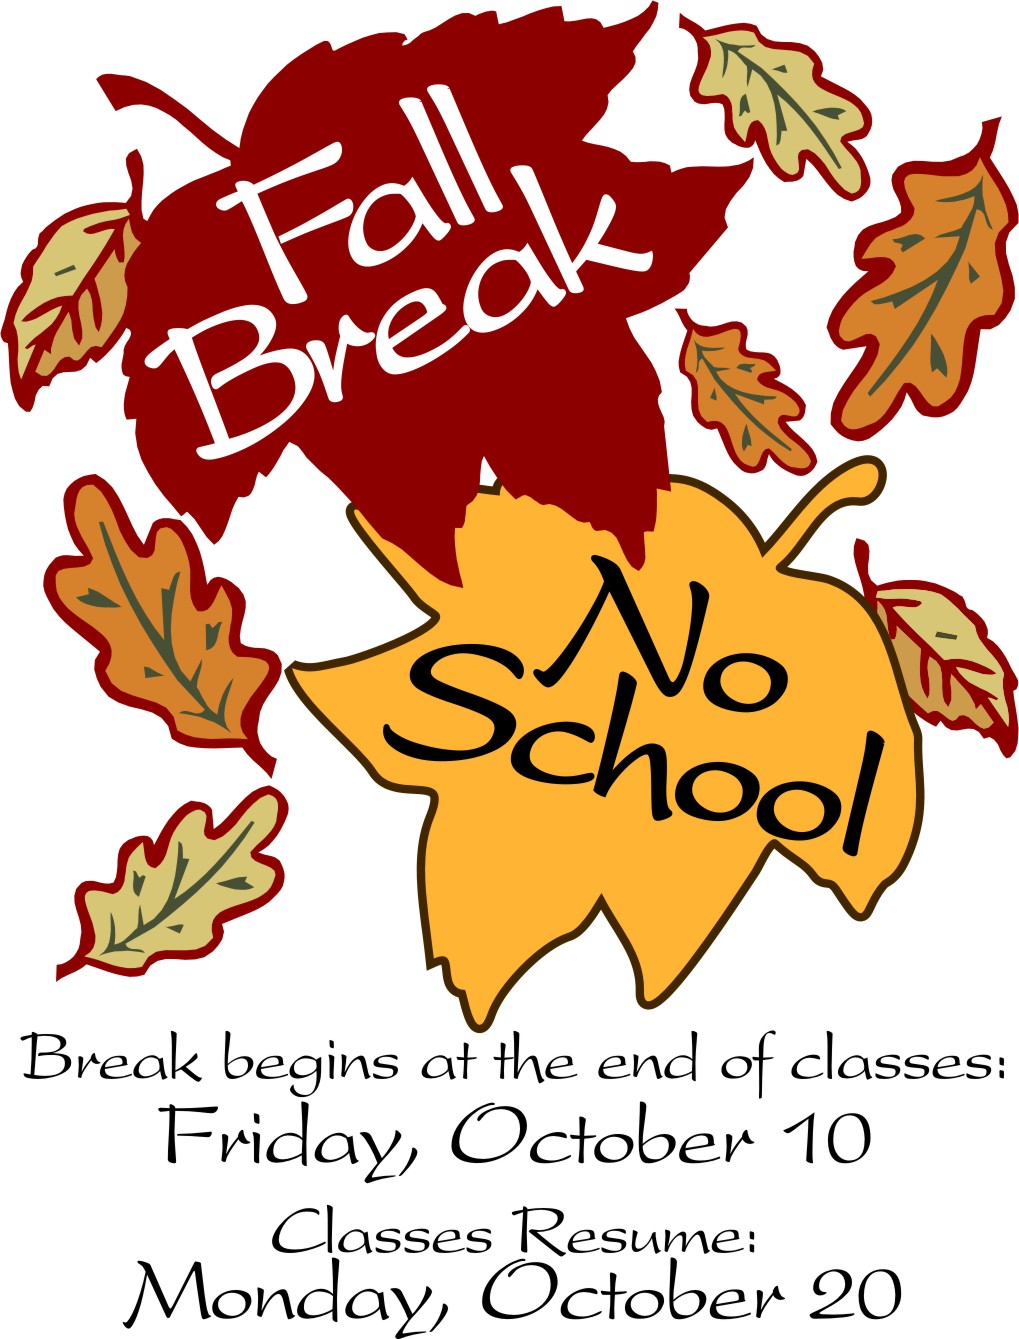     Creative Services For Child Nutrition Professionals   Fall Breaks